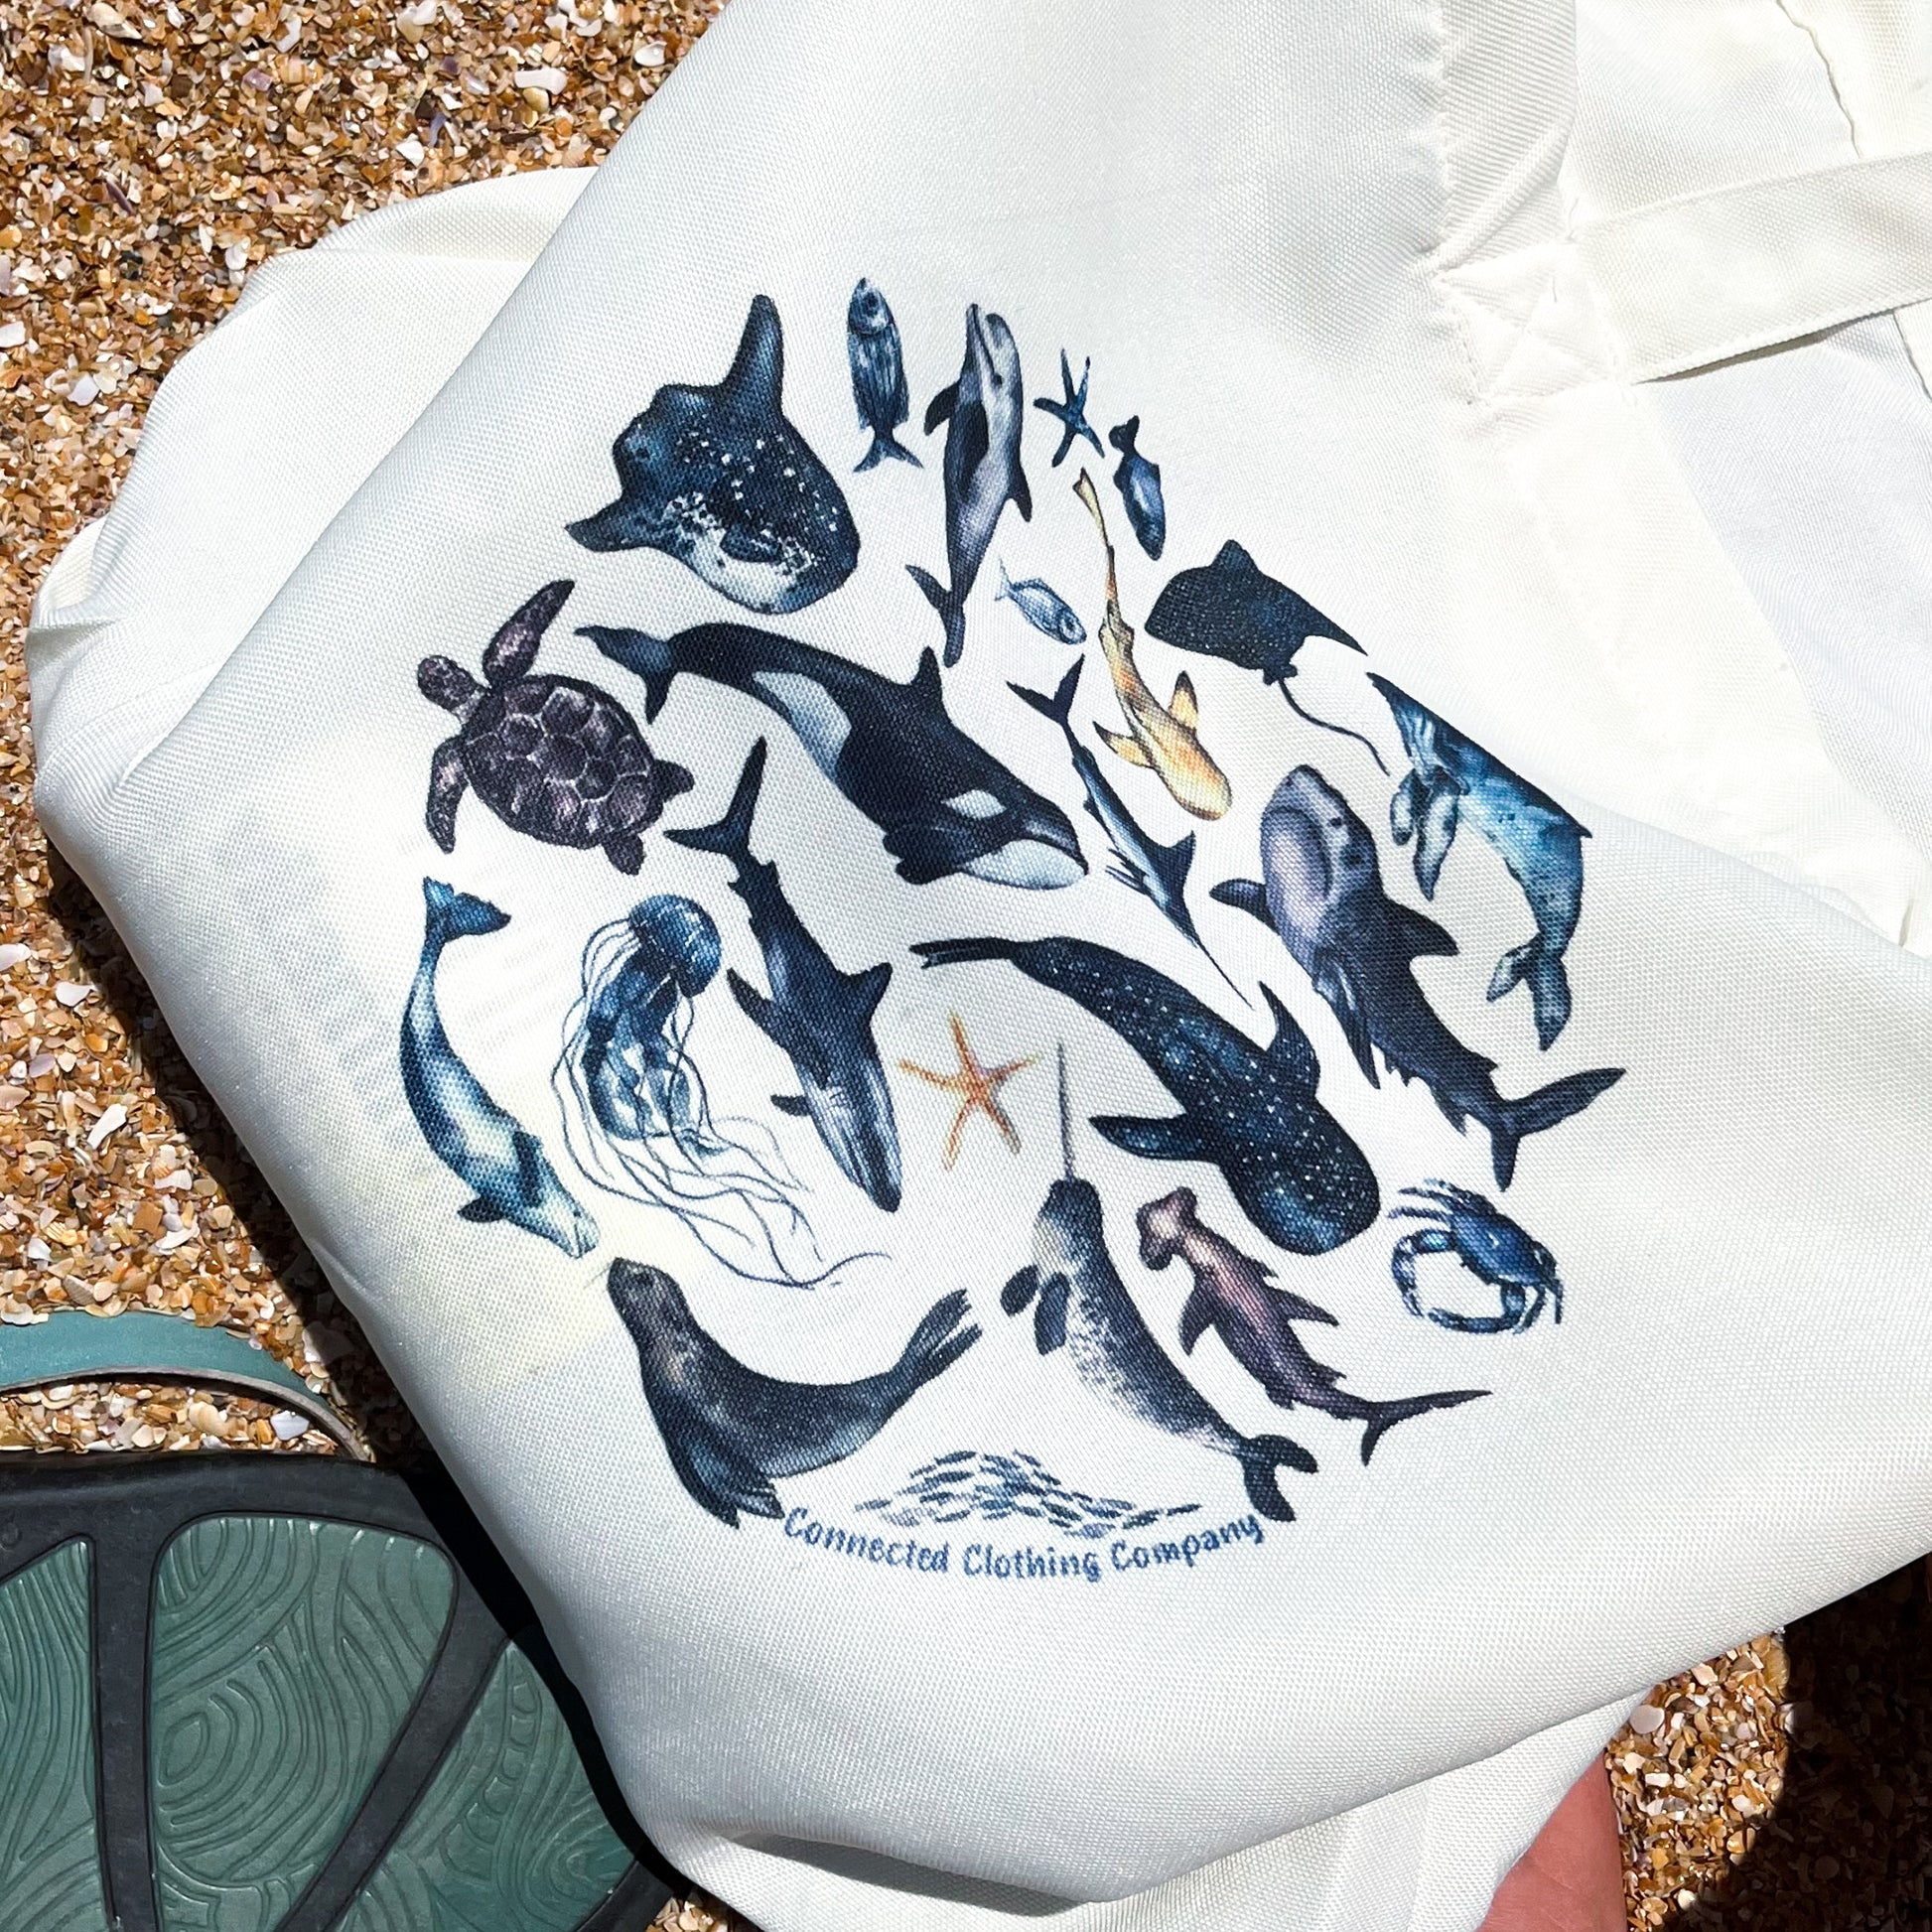 Blue Ocean Creatures Tote Bag - Connected Clothing Company - 10% donated to ocean conservation